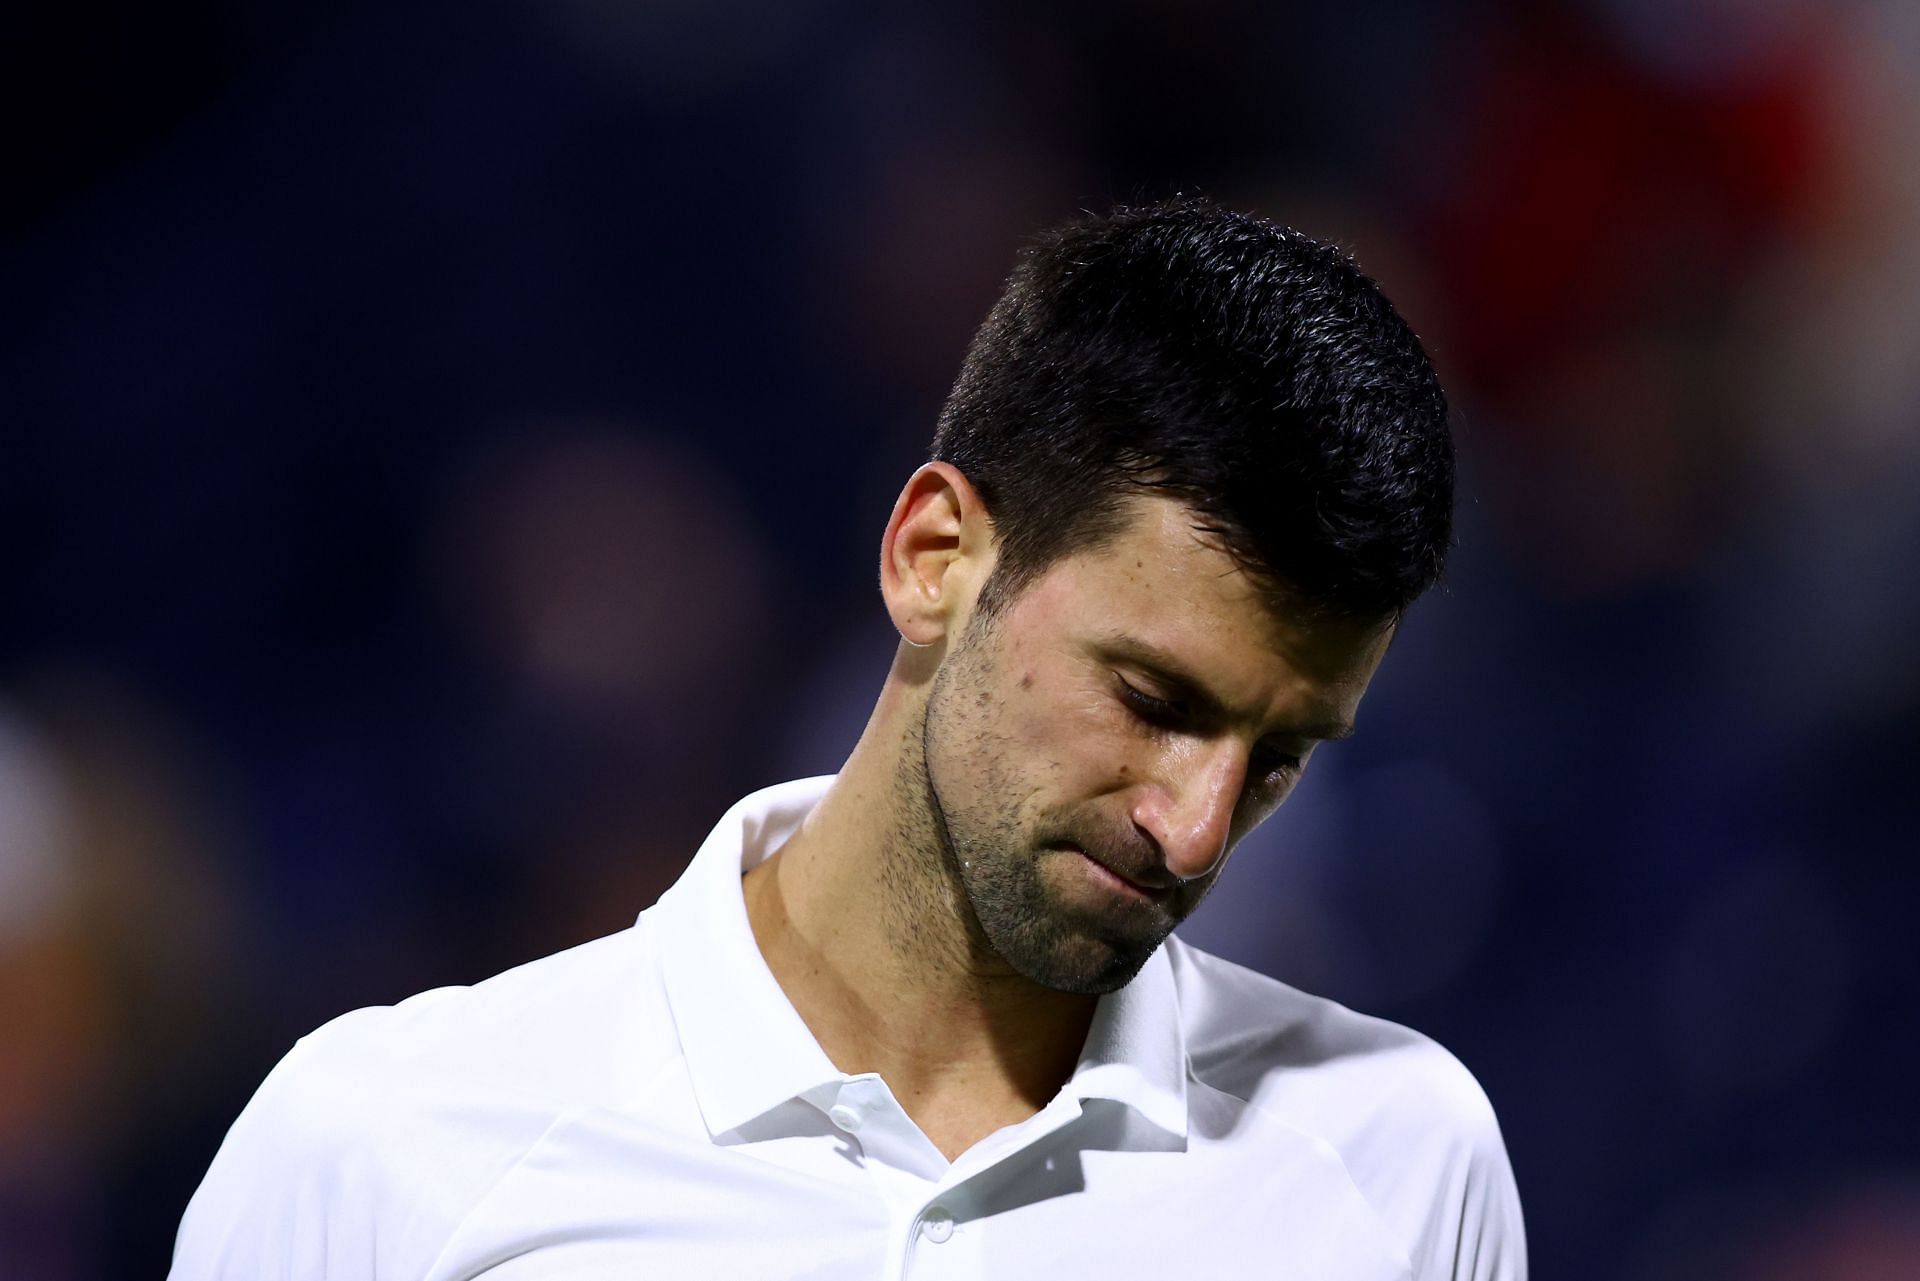 Novak Djokovic will not compete in the Indian Wells and Miami Masters